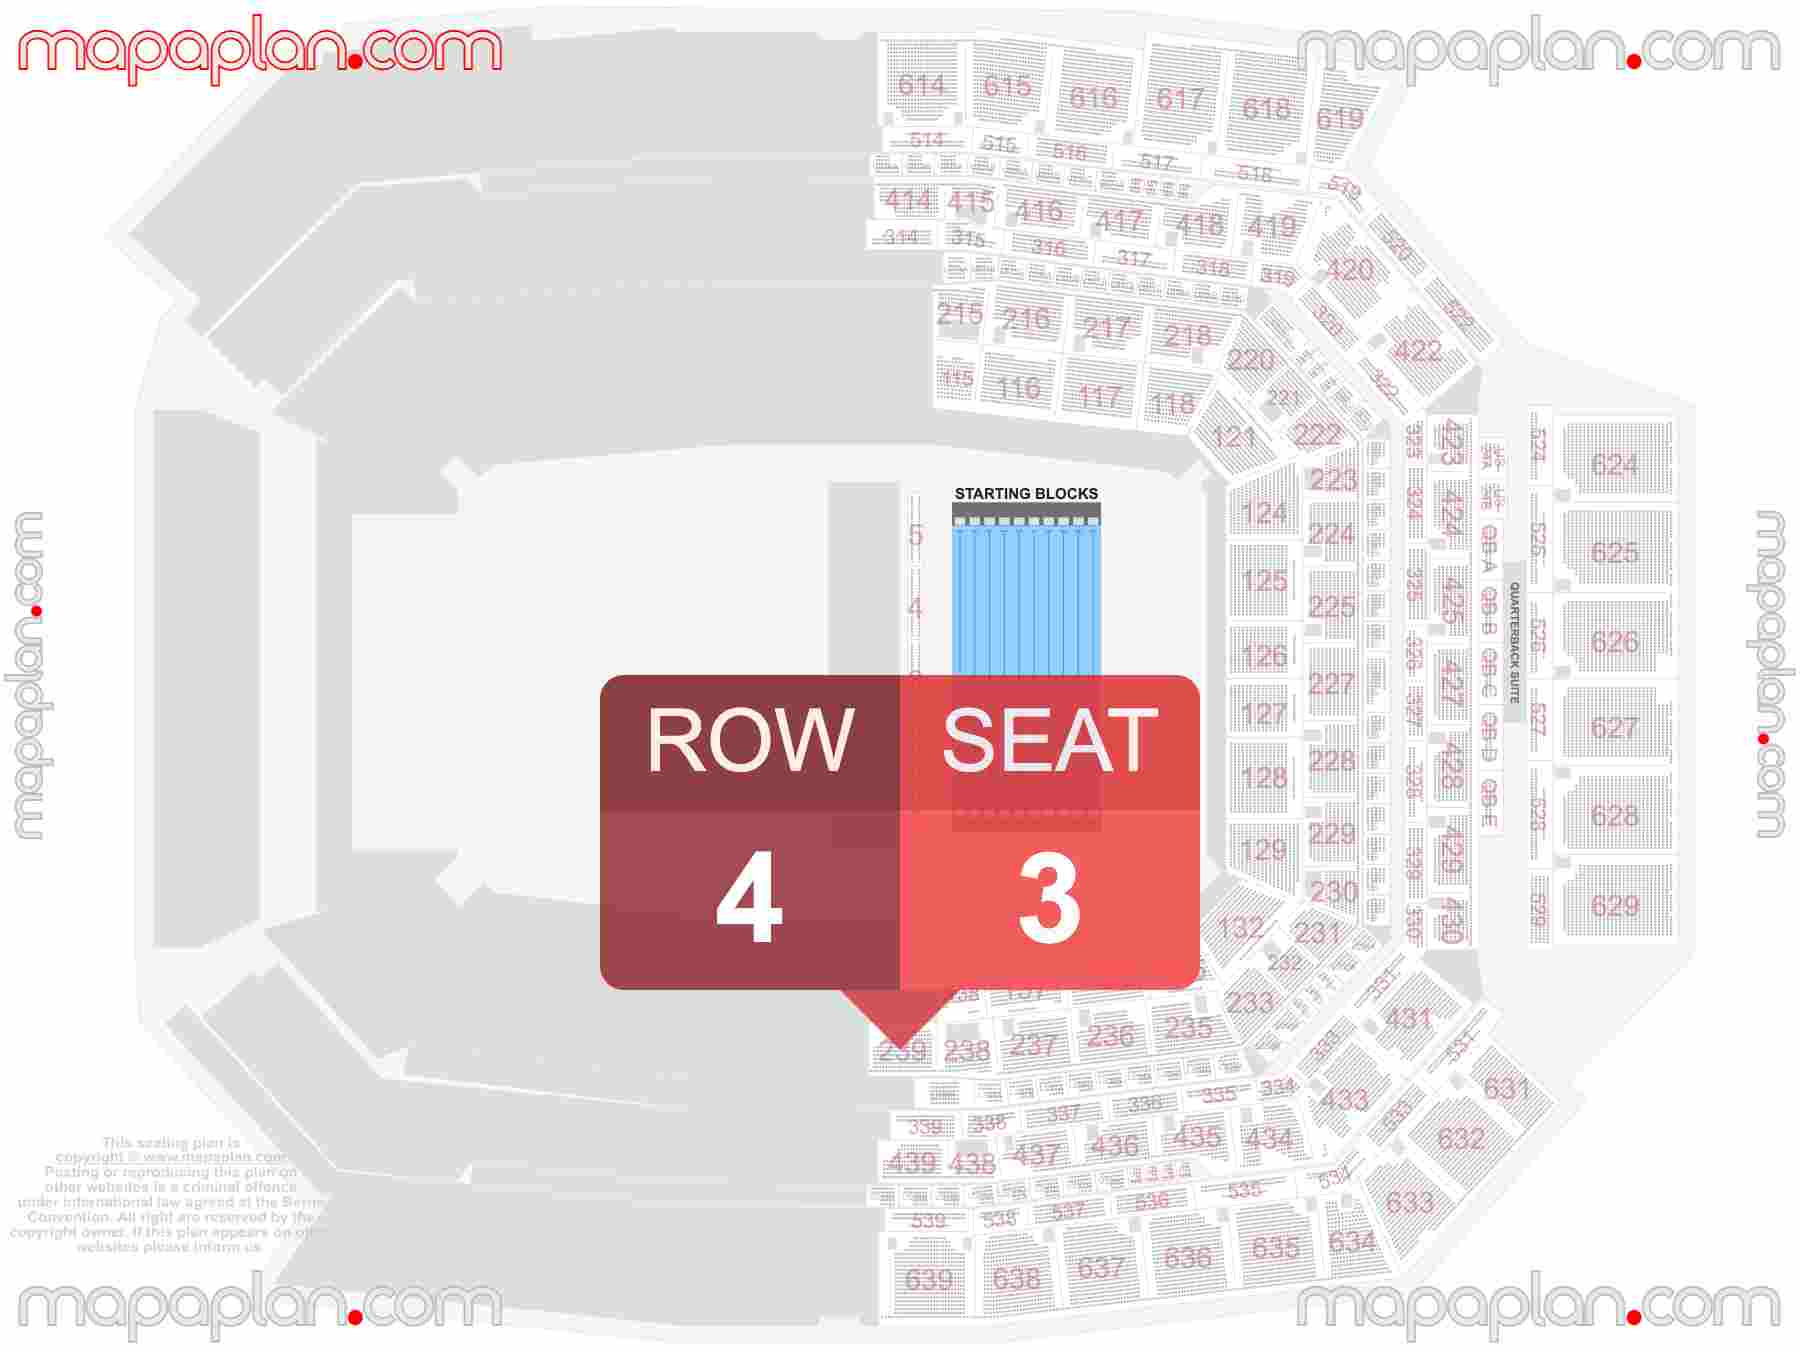 Indianapolis Lucas Oil Stadium seating chart Swimming pool interactive seating checker map plan showing seat numbers per row - Ticket prices sections review diagram